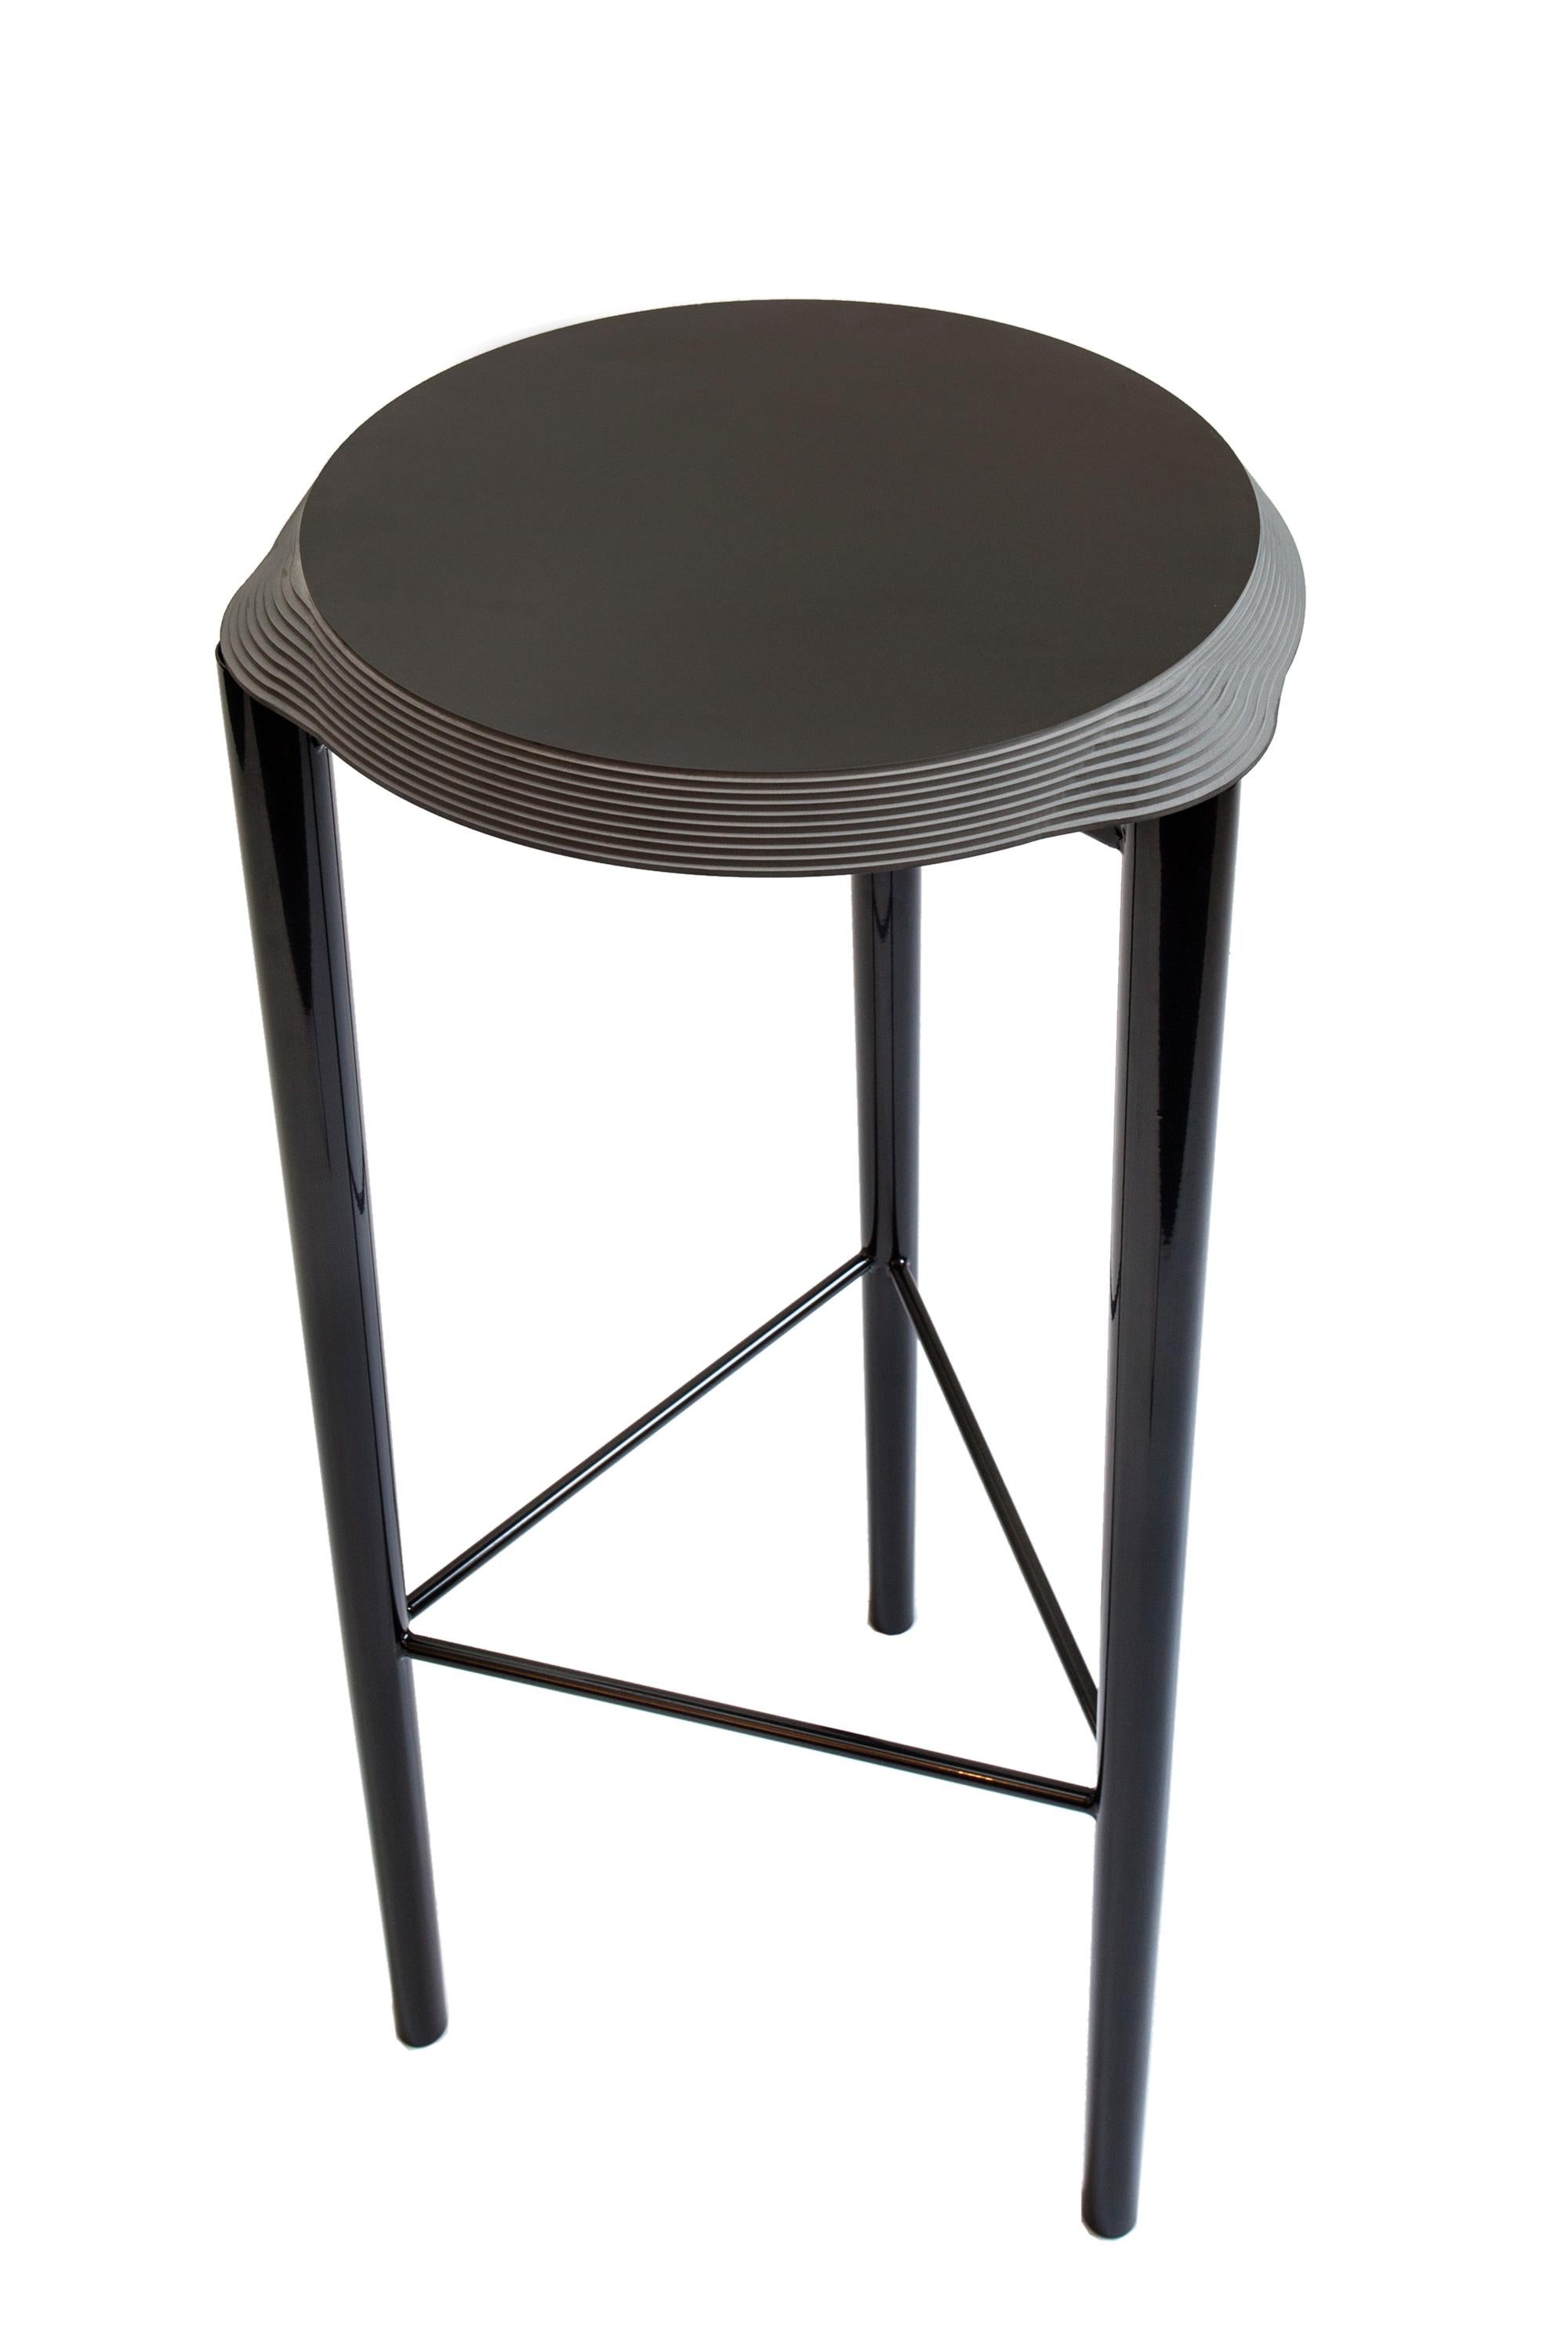 Italian Contemporary Jump High Stool with Black Corian Top For Sale